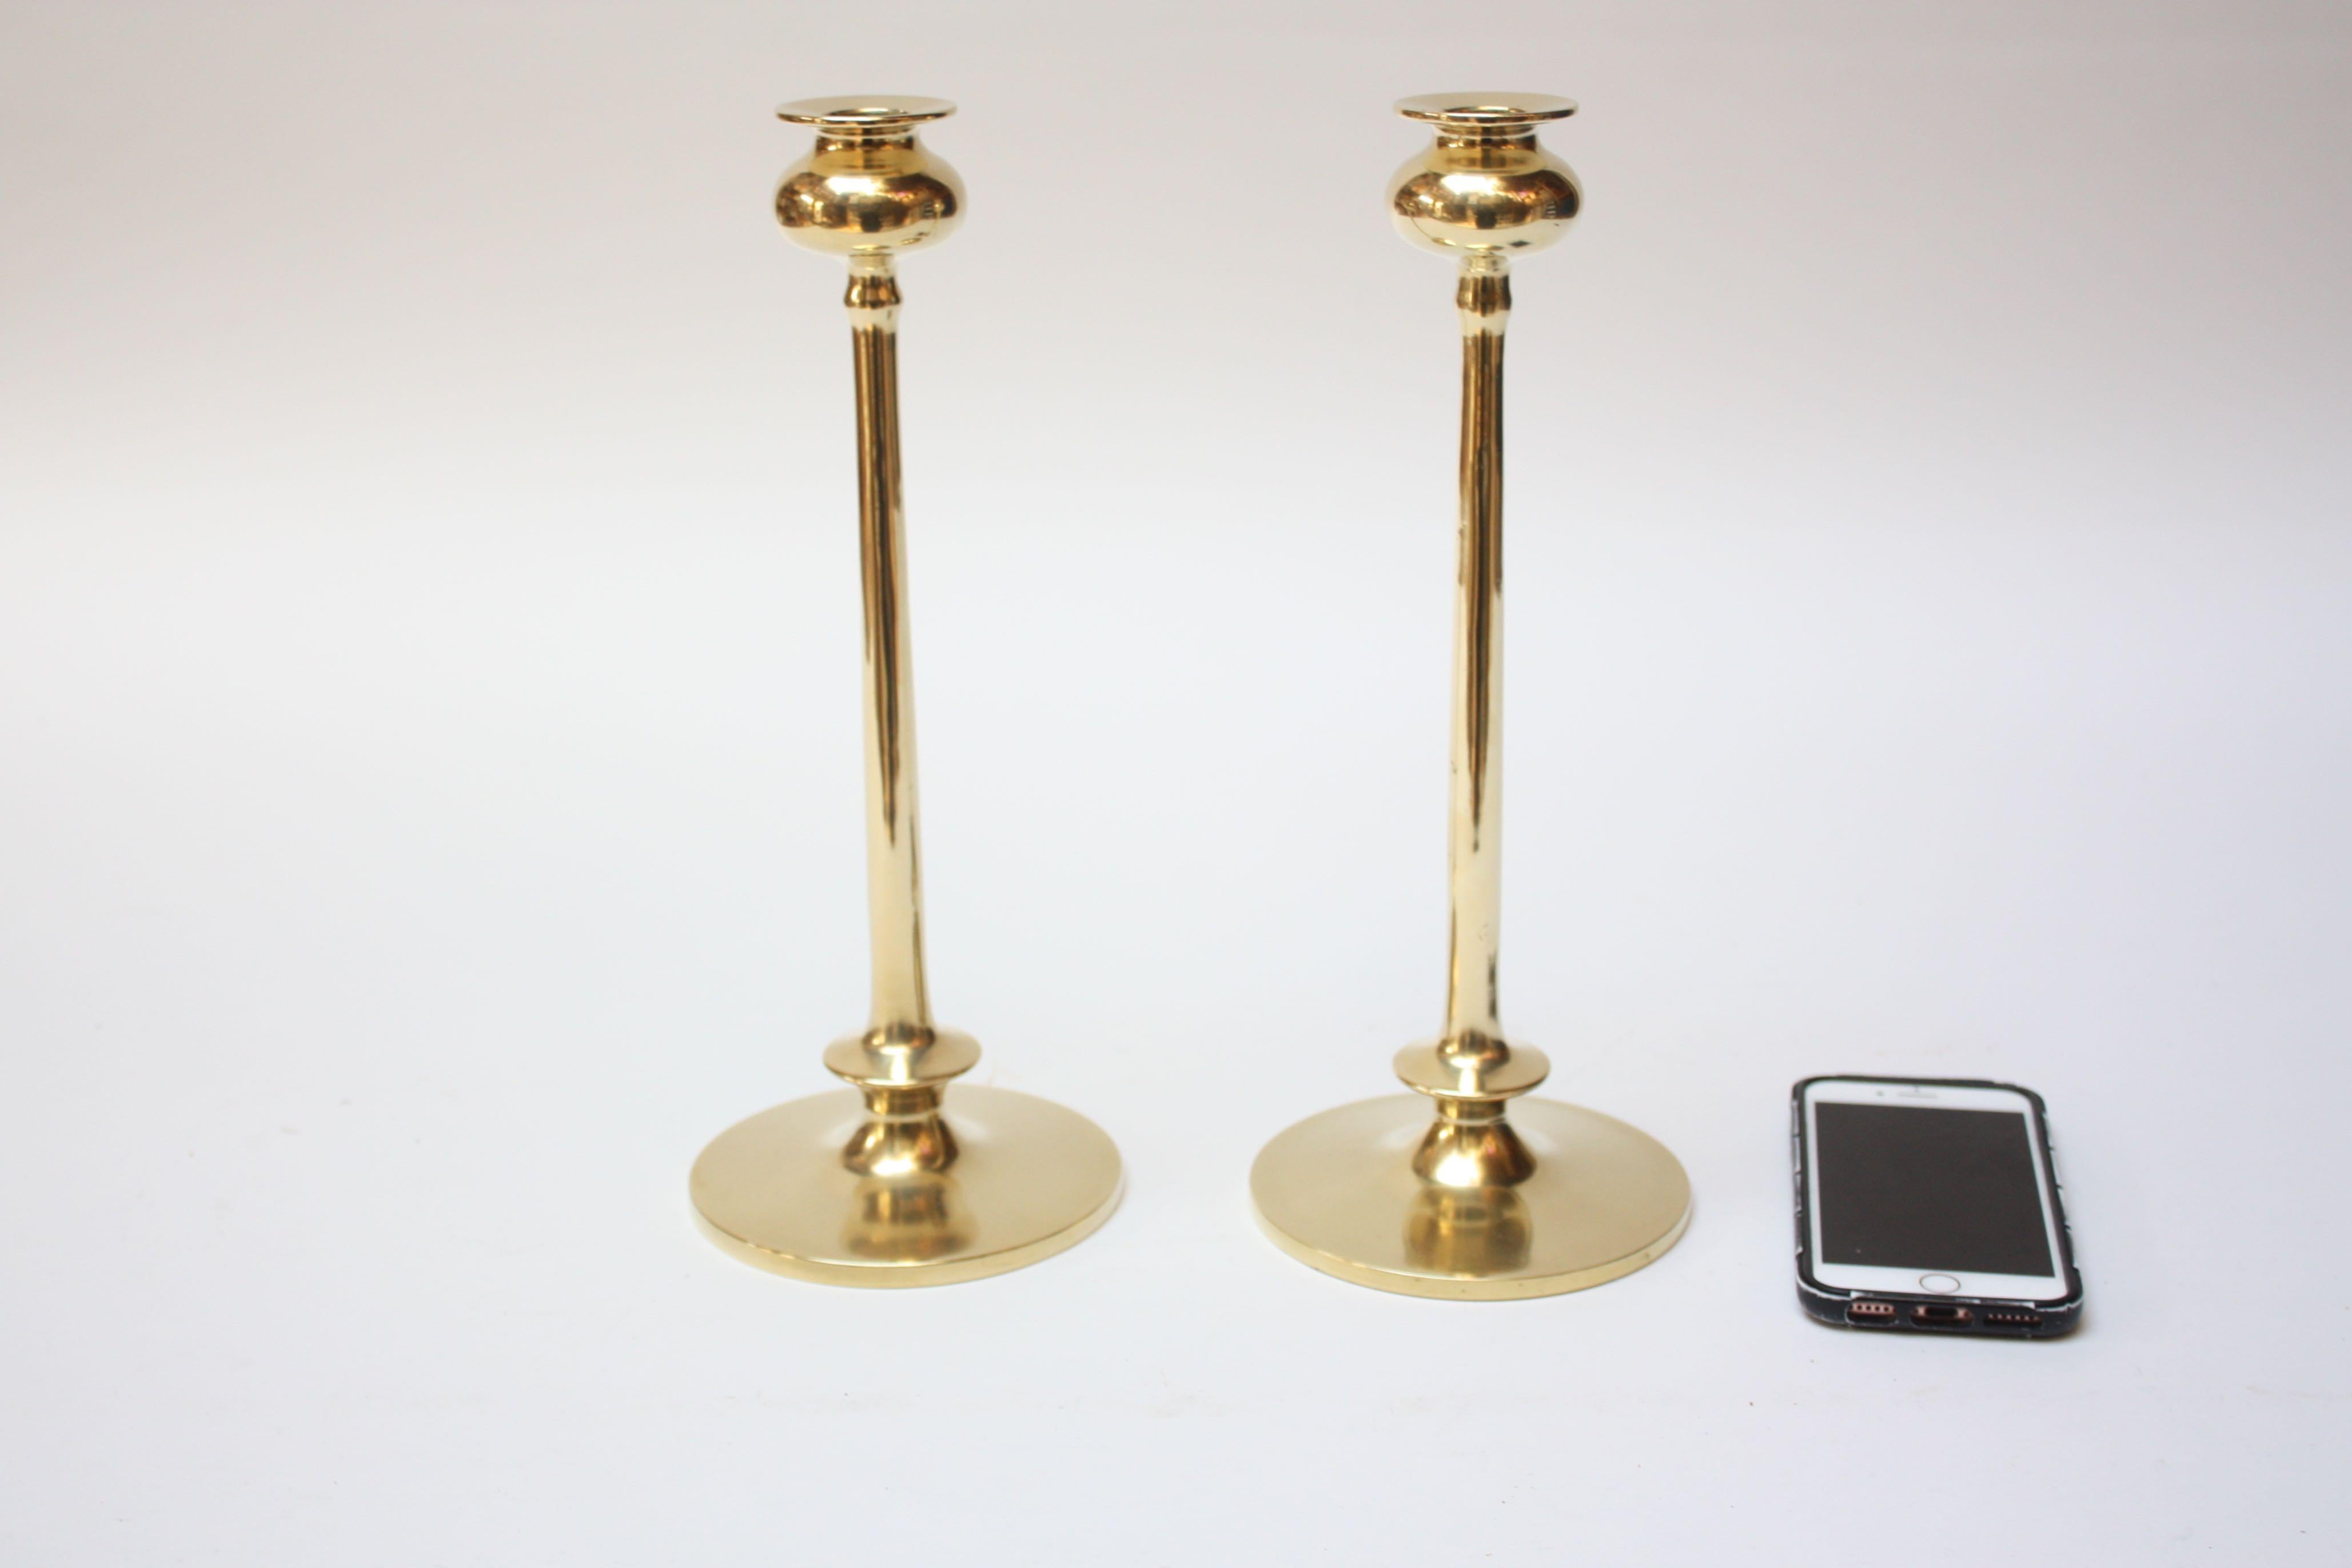 Polished Pair of Mid-Century Modern Turned Brass Candlesticks after Jarvie